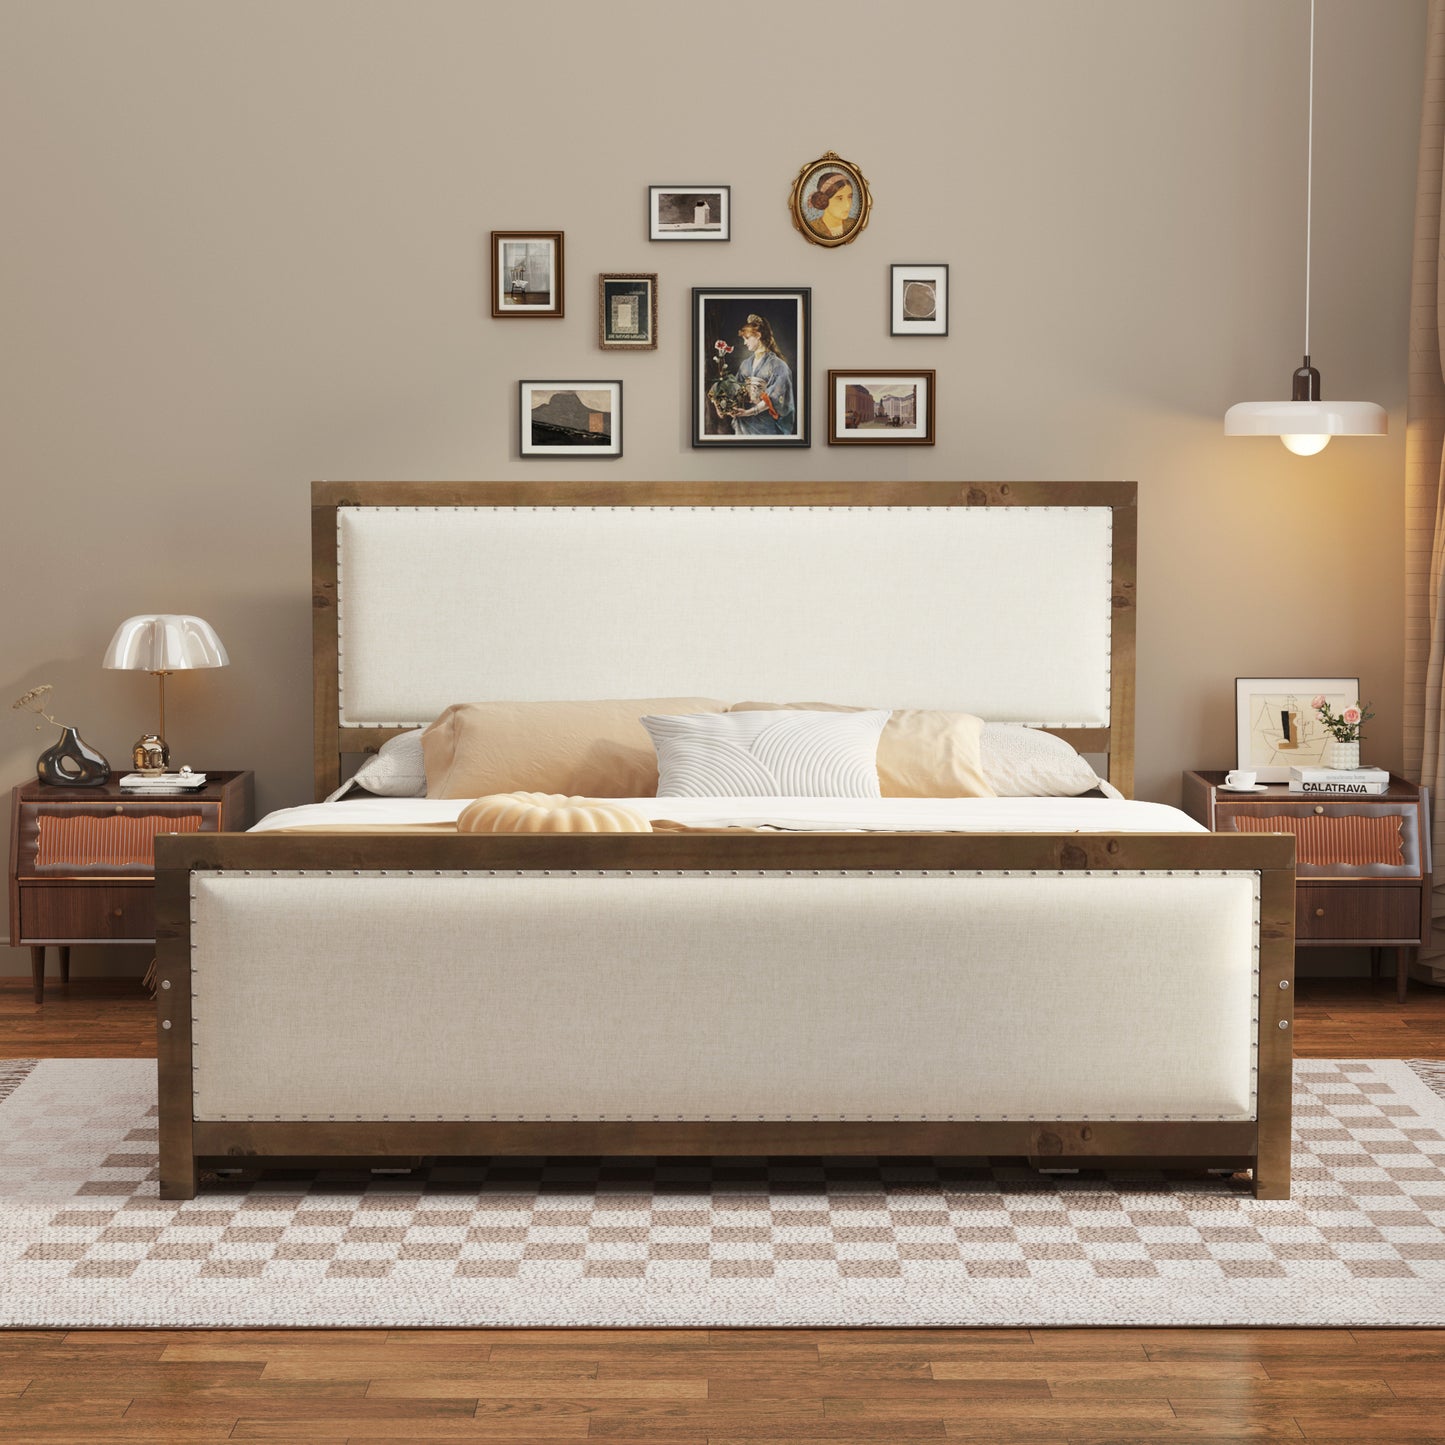 Queen Size Upholstered Platform Bed with Wood Frame and 4 Drawers, Natural Wooden+Beige Fabric - Enova Luxe Home Store